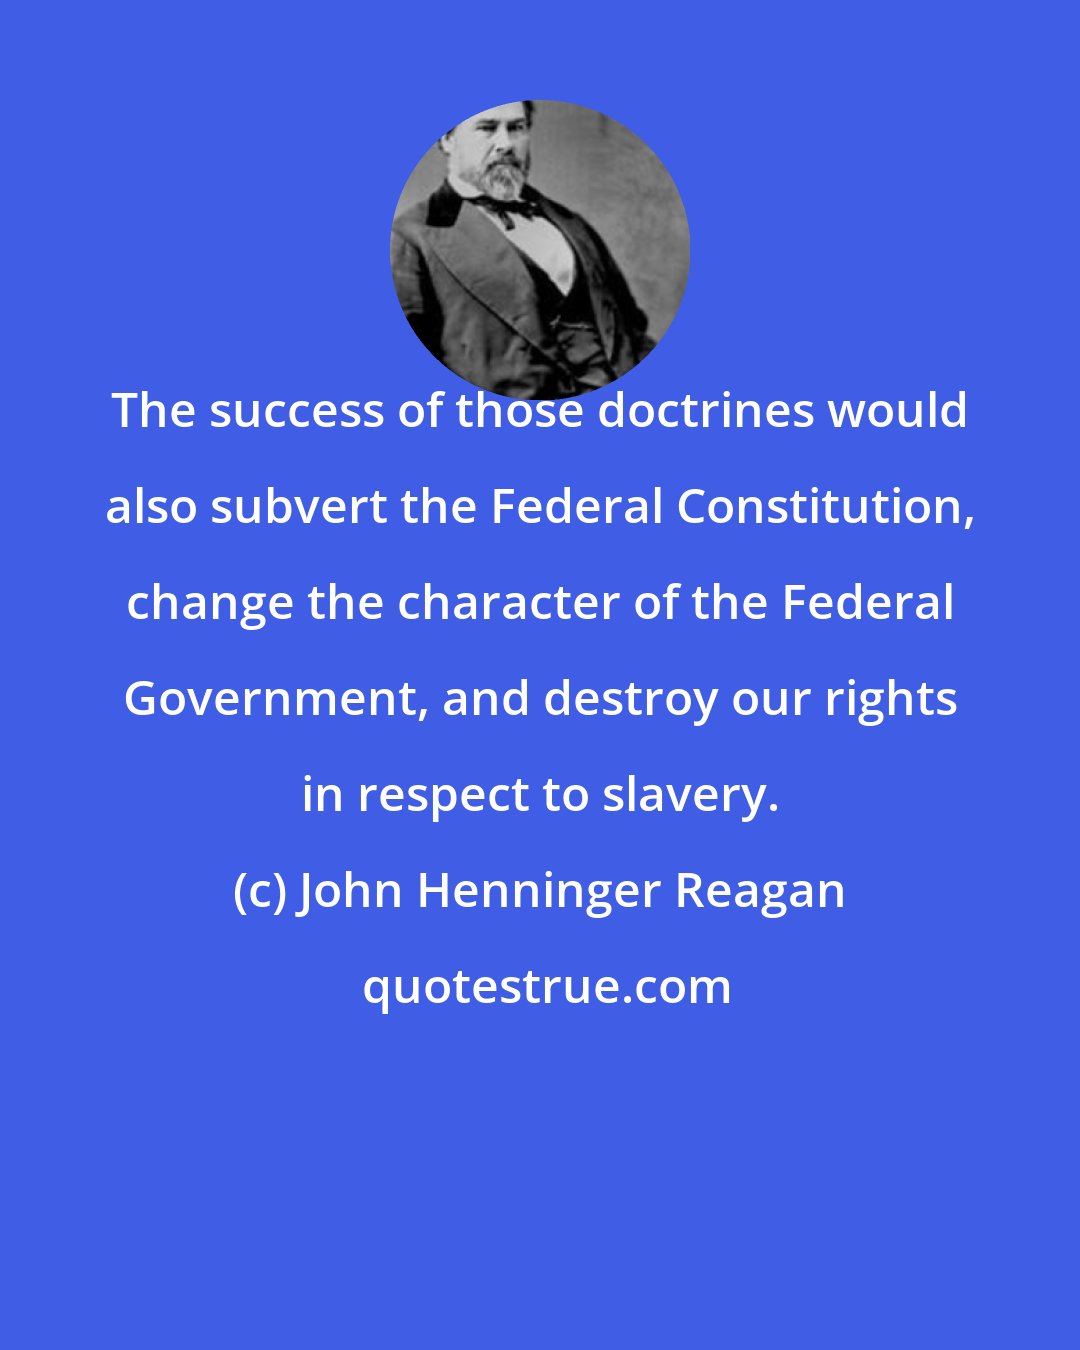 John Henninger Reagan: The success of those doctrines would also subvert the Federal Constitution, change the character of the Federal Government, and destroy our rights in respect to slavery.